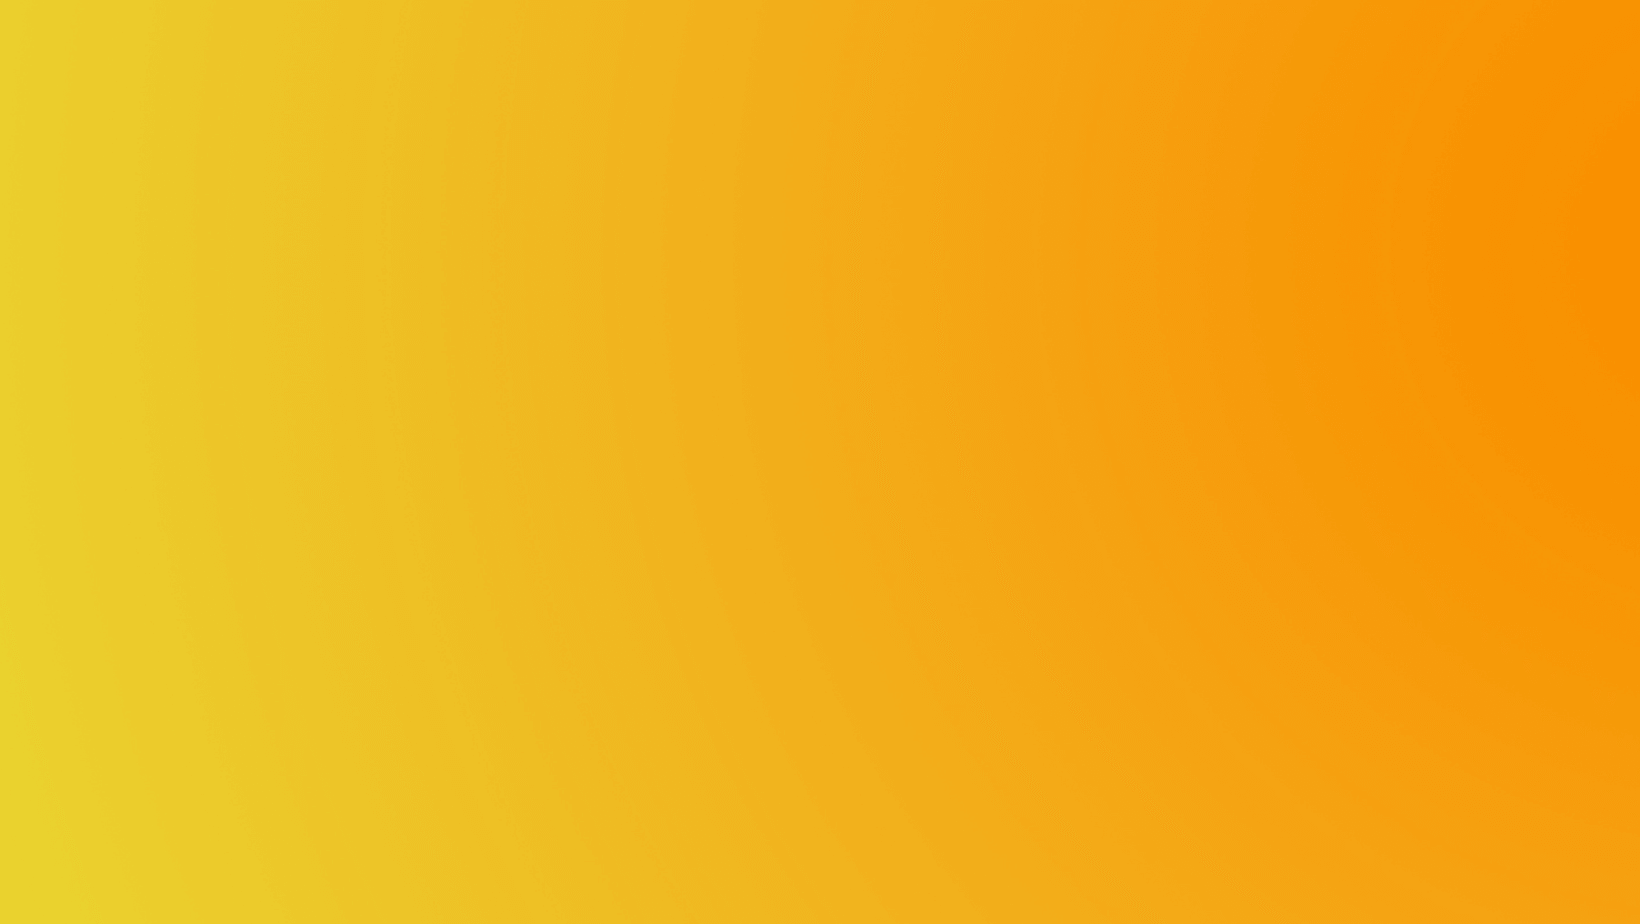 A smooth gradient background transitioning from yellow on the left to orange on the right. The colors blend seamlessly, creating a warm and vibrant visual effect.